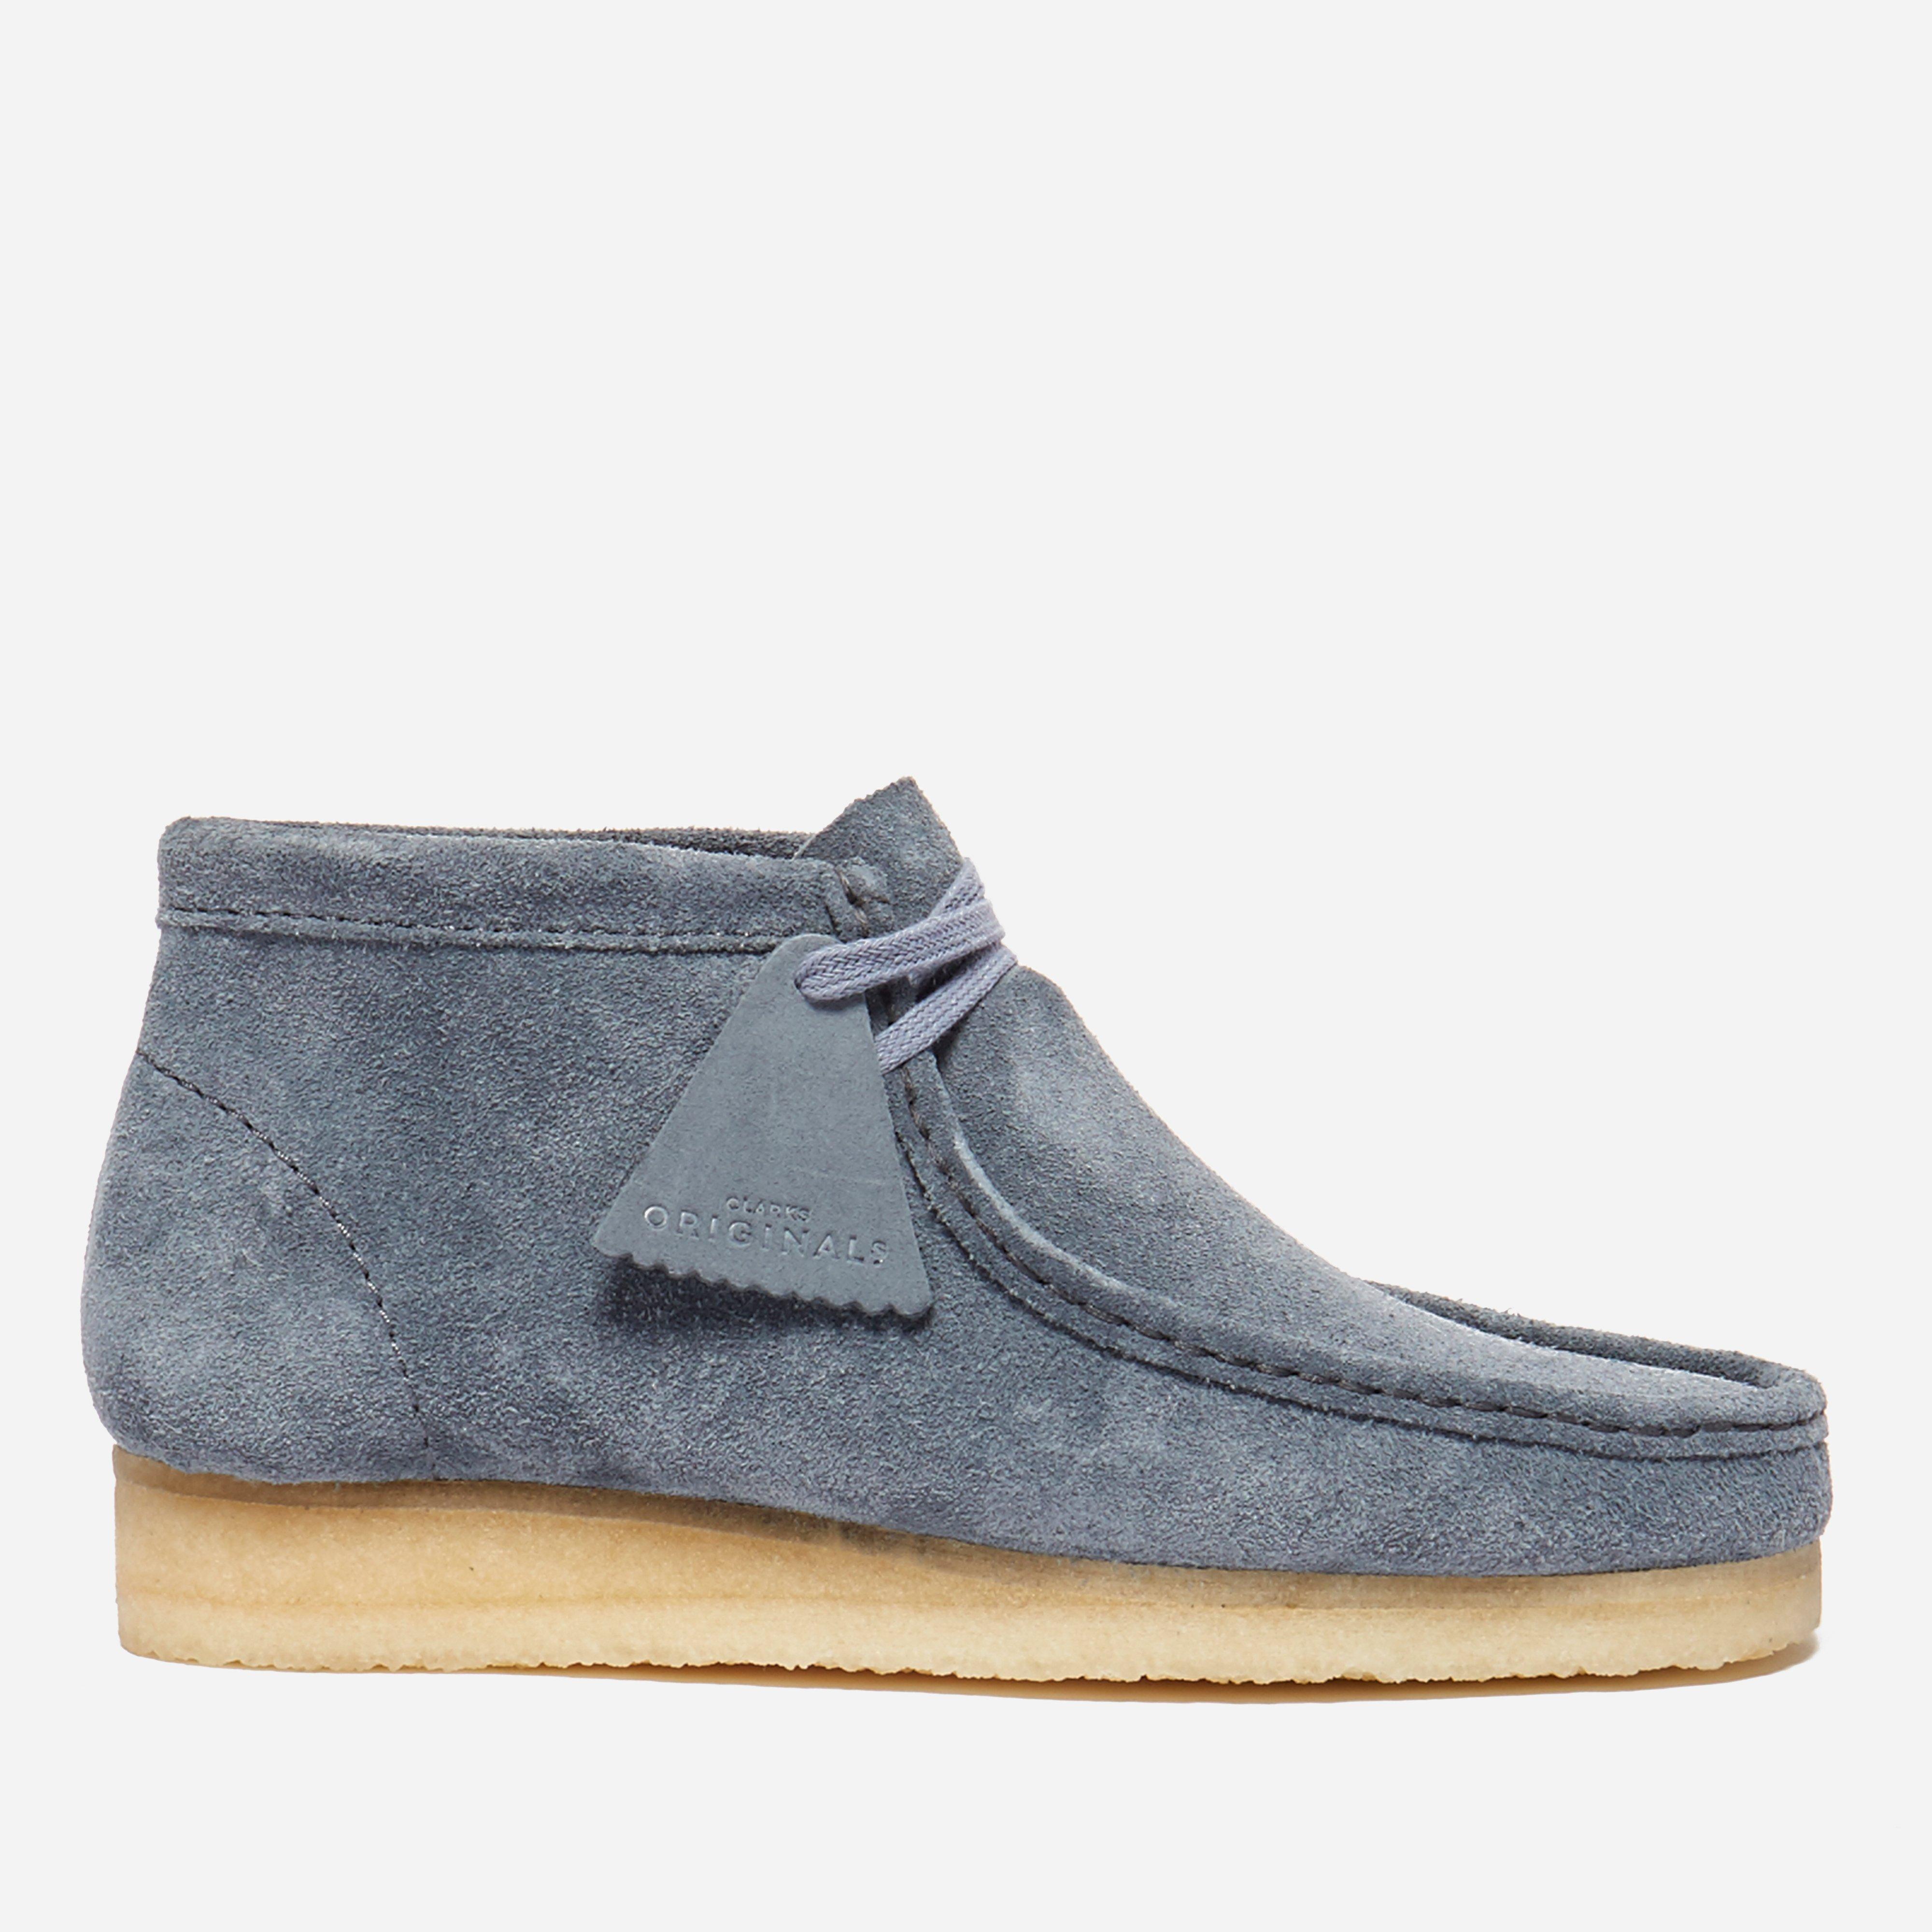 Clarks Suede Wallabee Boot in Blue for Men - Lyst